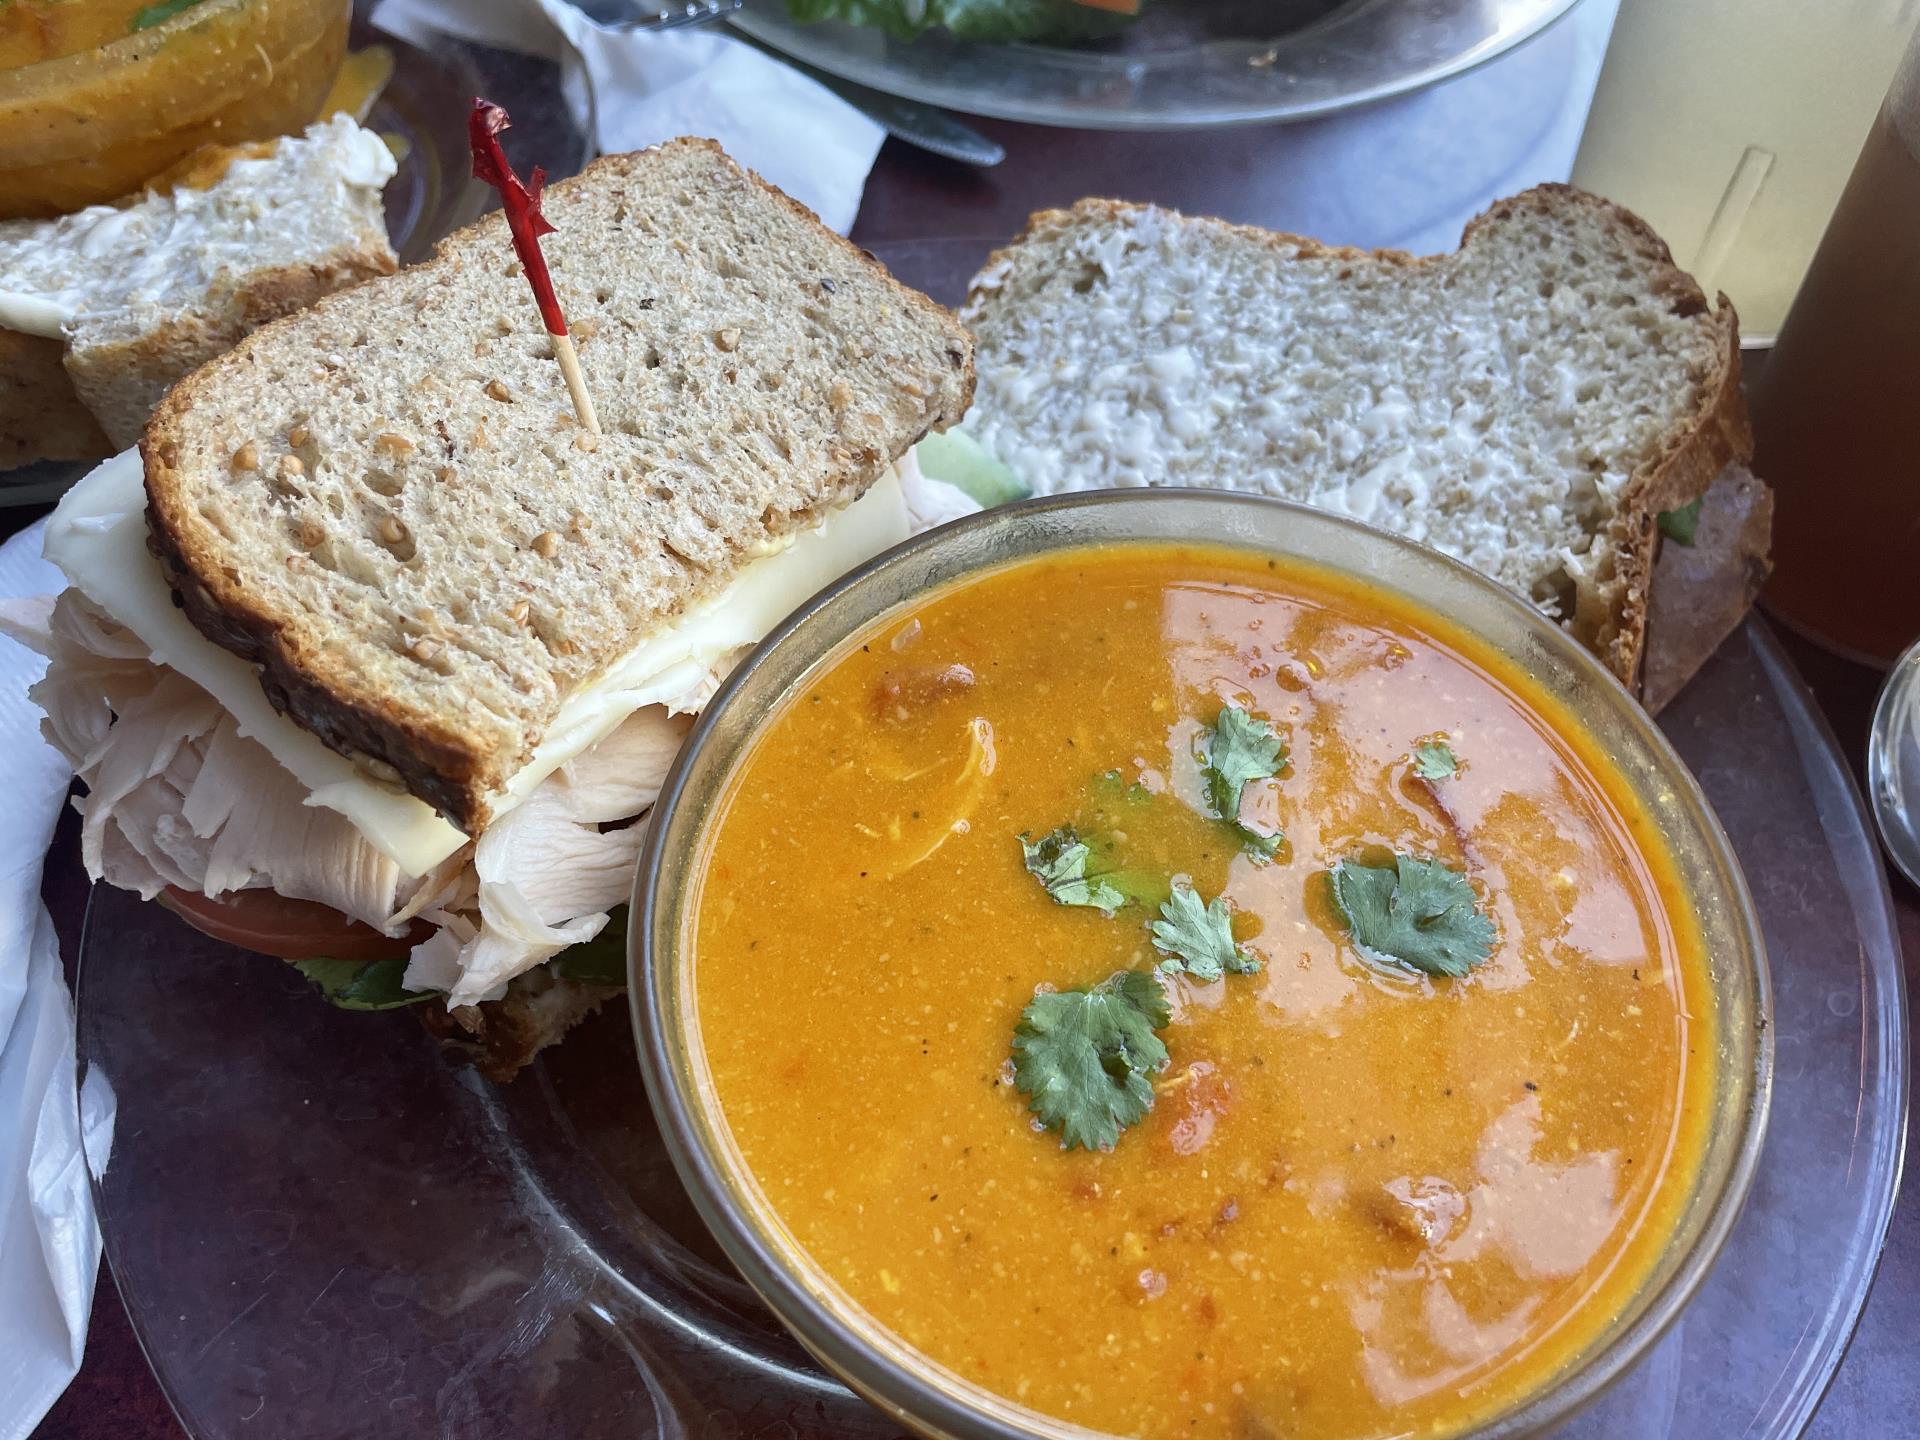 A bowl of soup and sandwich.